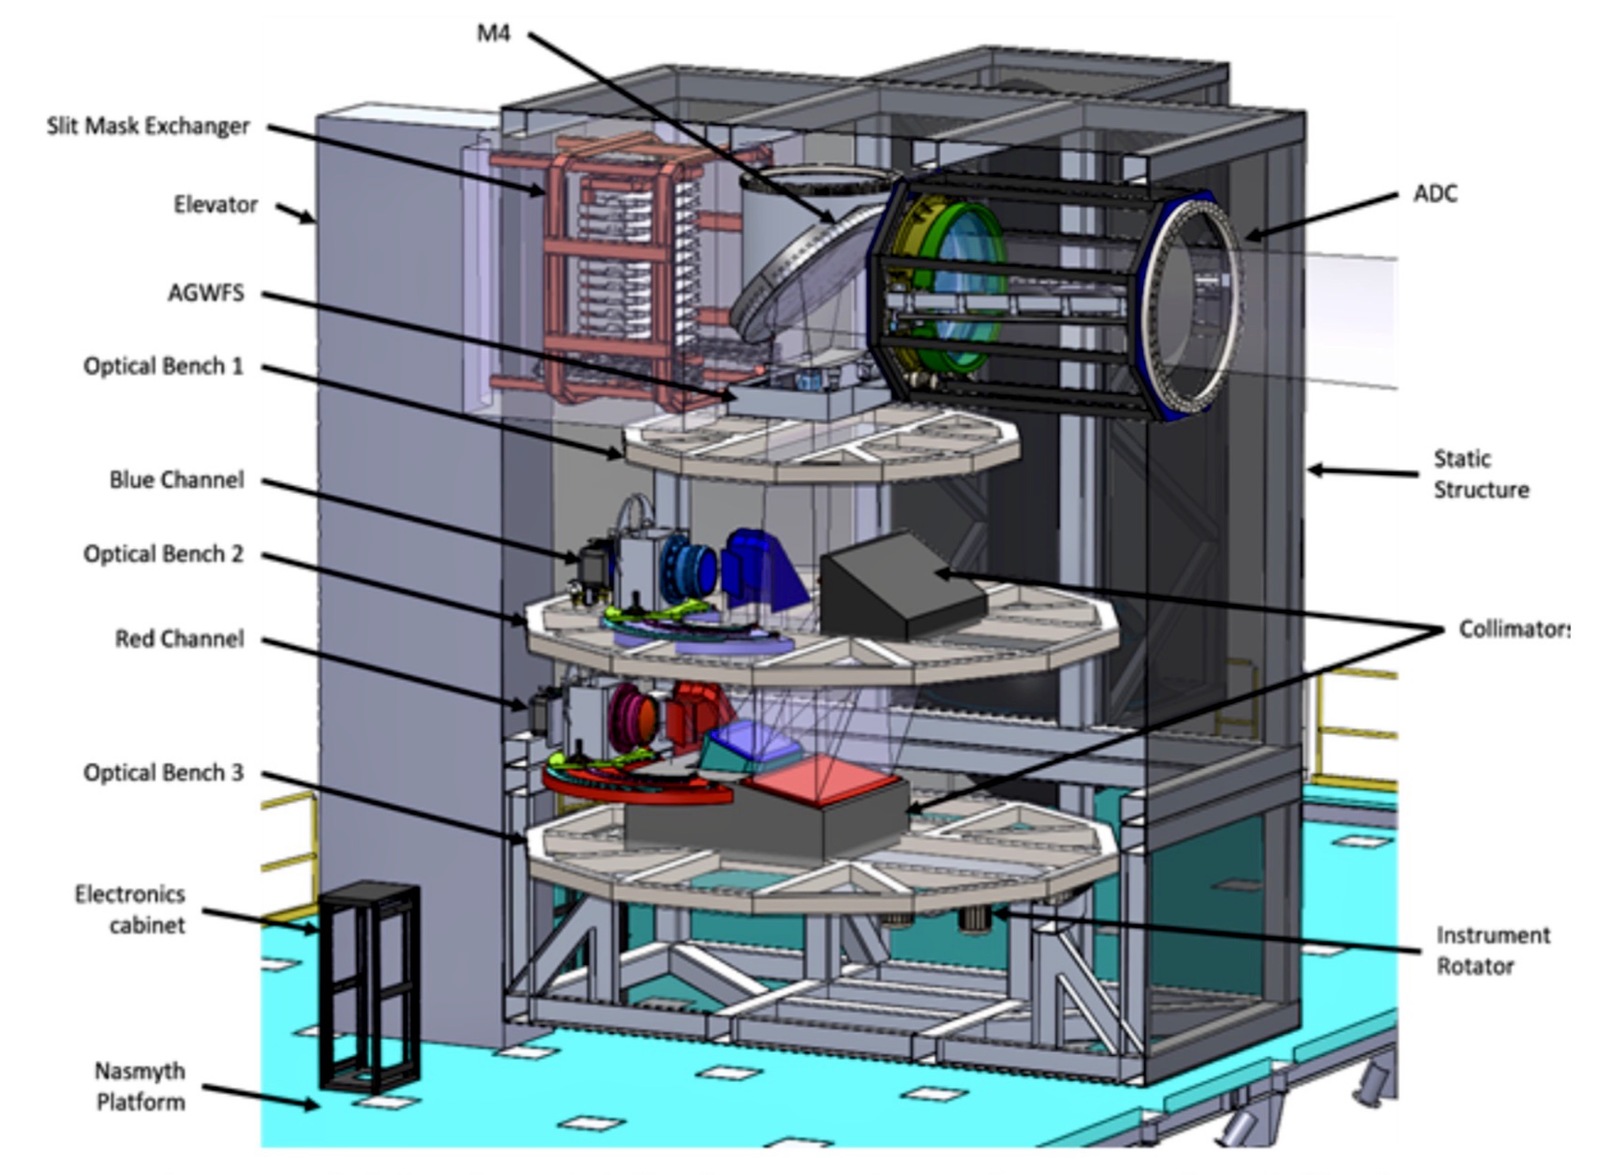 Detailed cross-sectional view of the WFOS Instrument